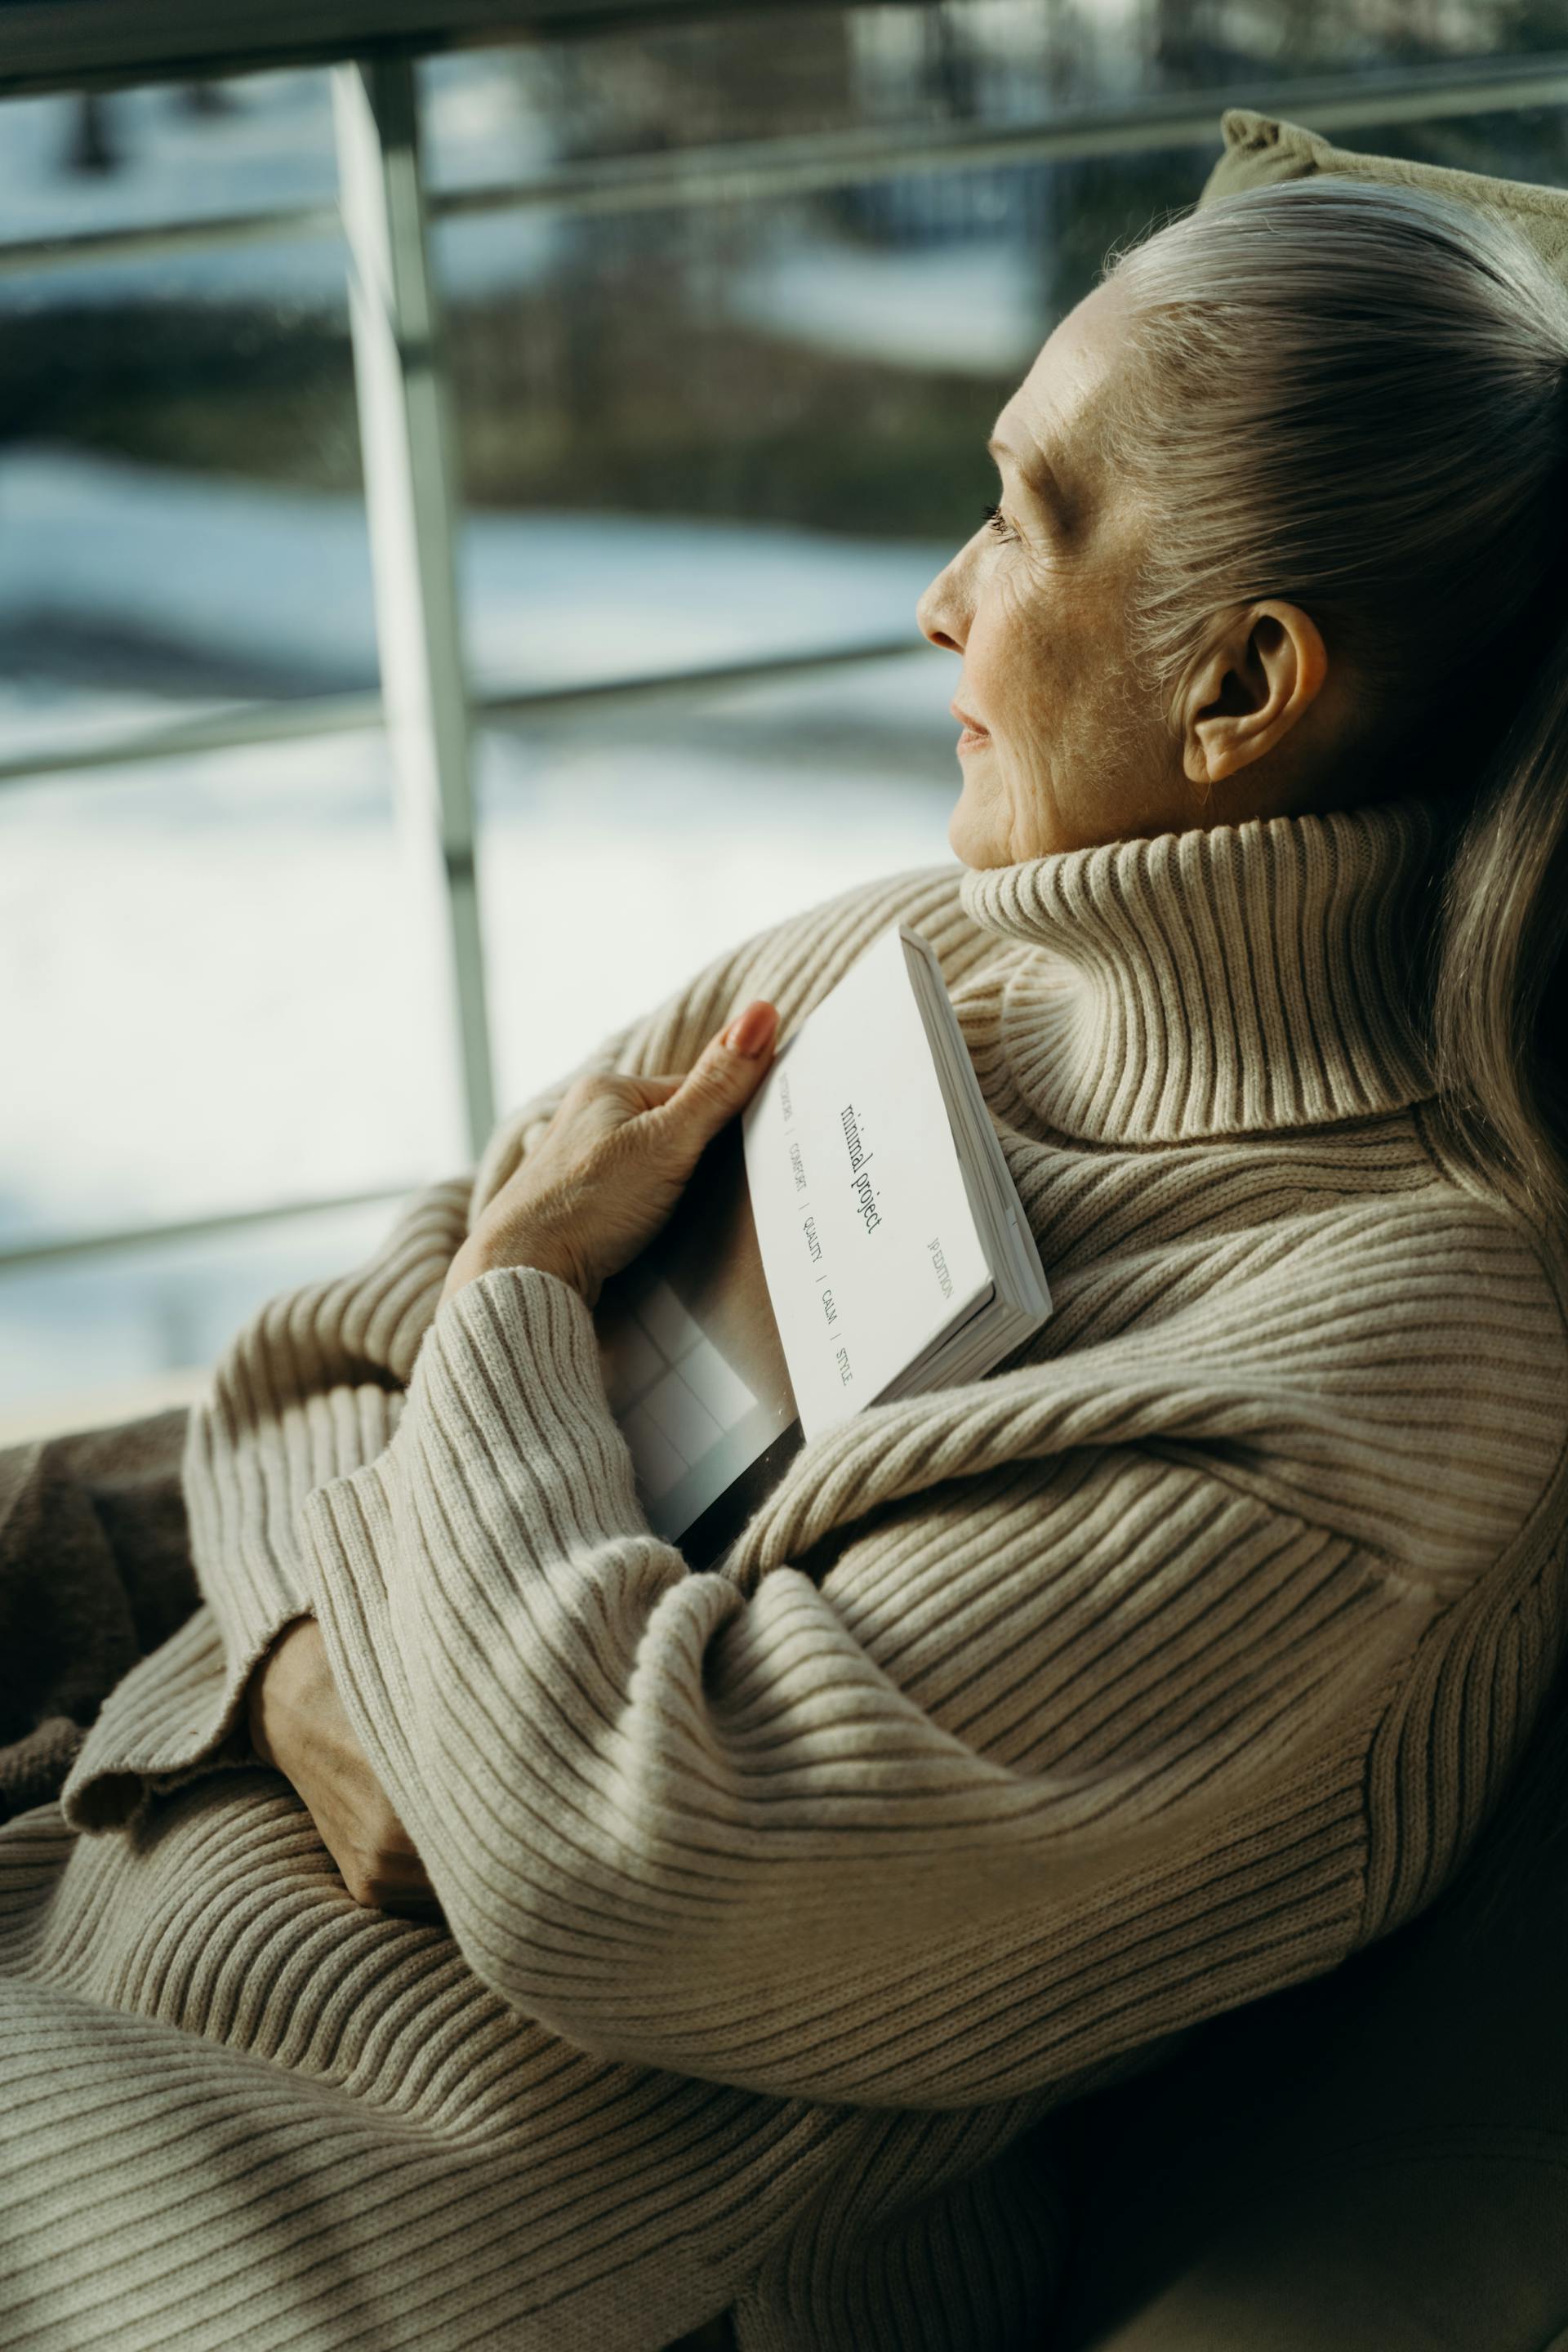 An old woman sitting and looking out the window | Source: Pexels